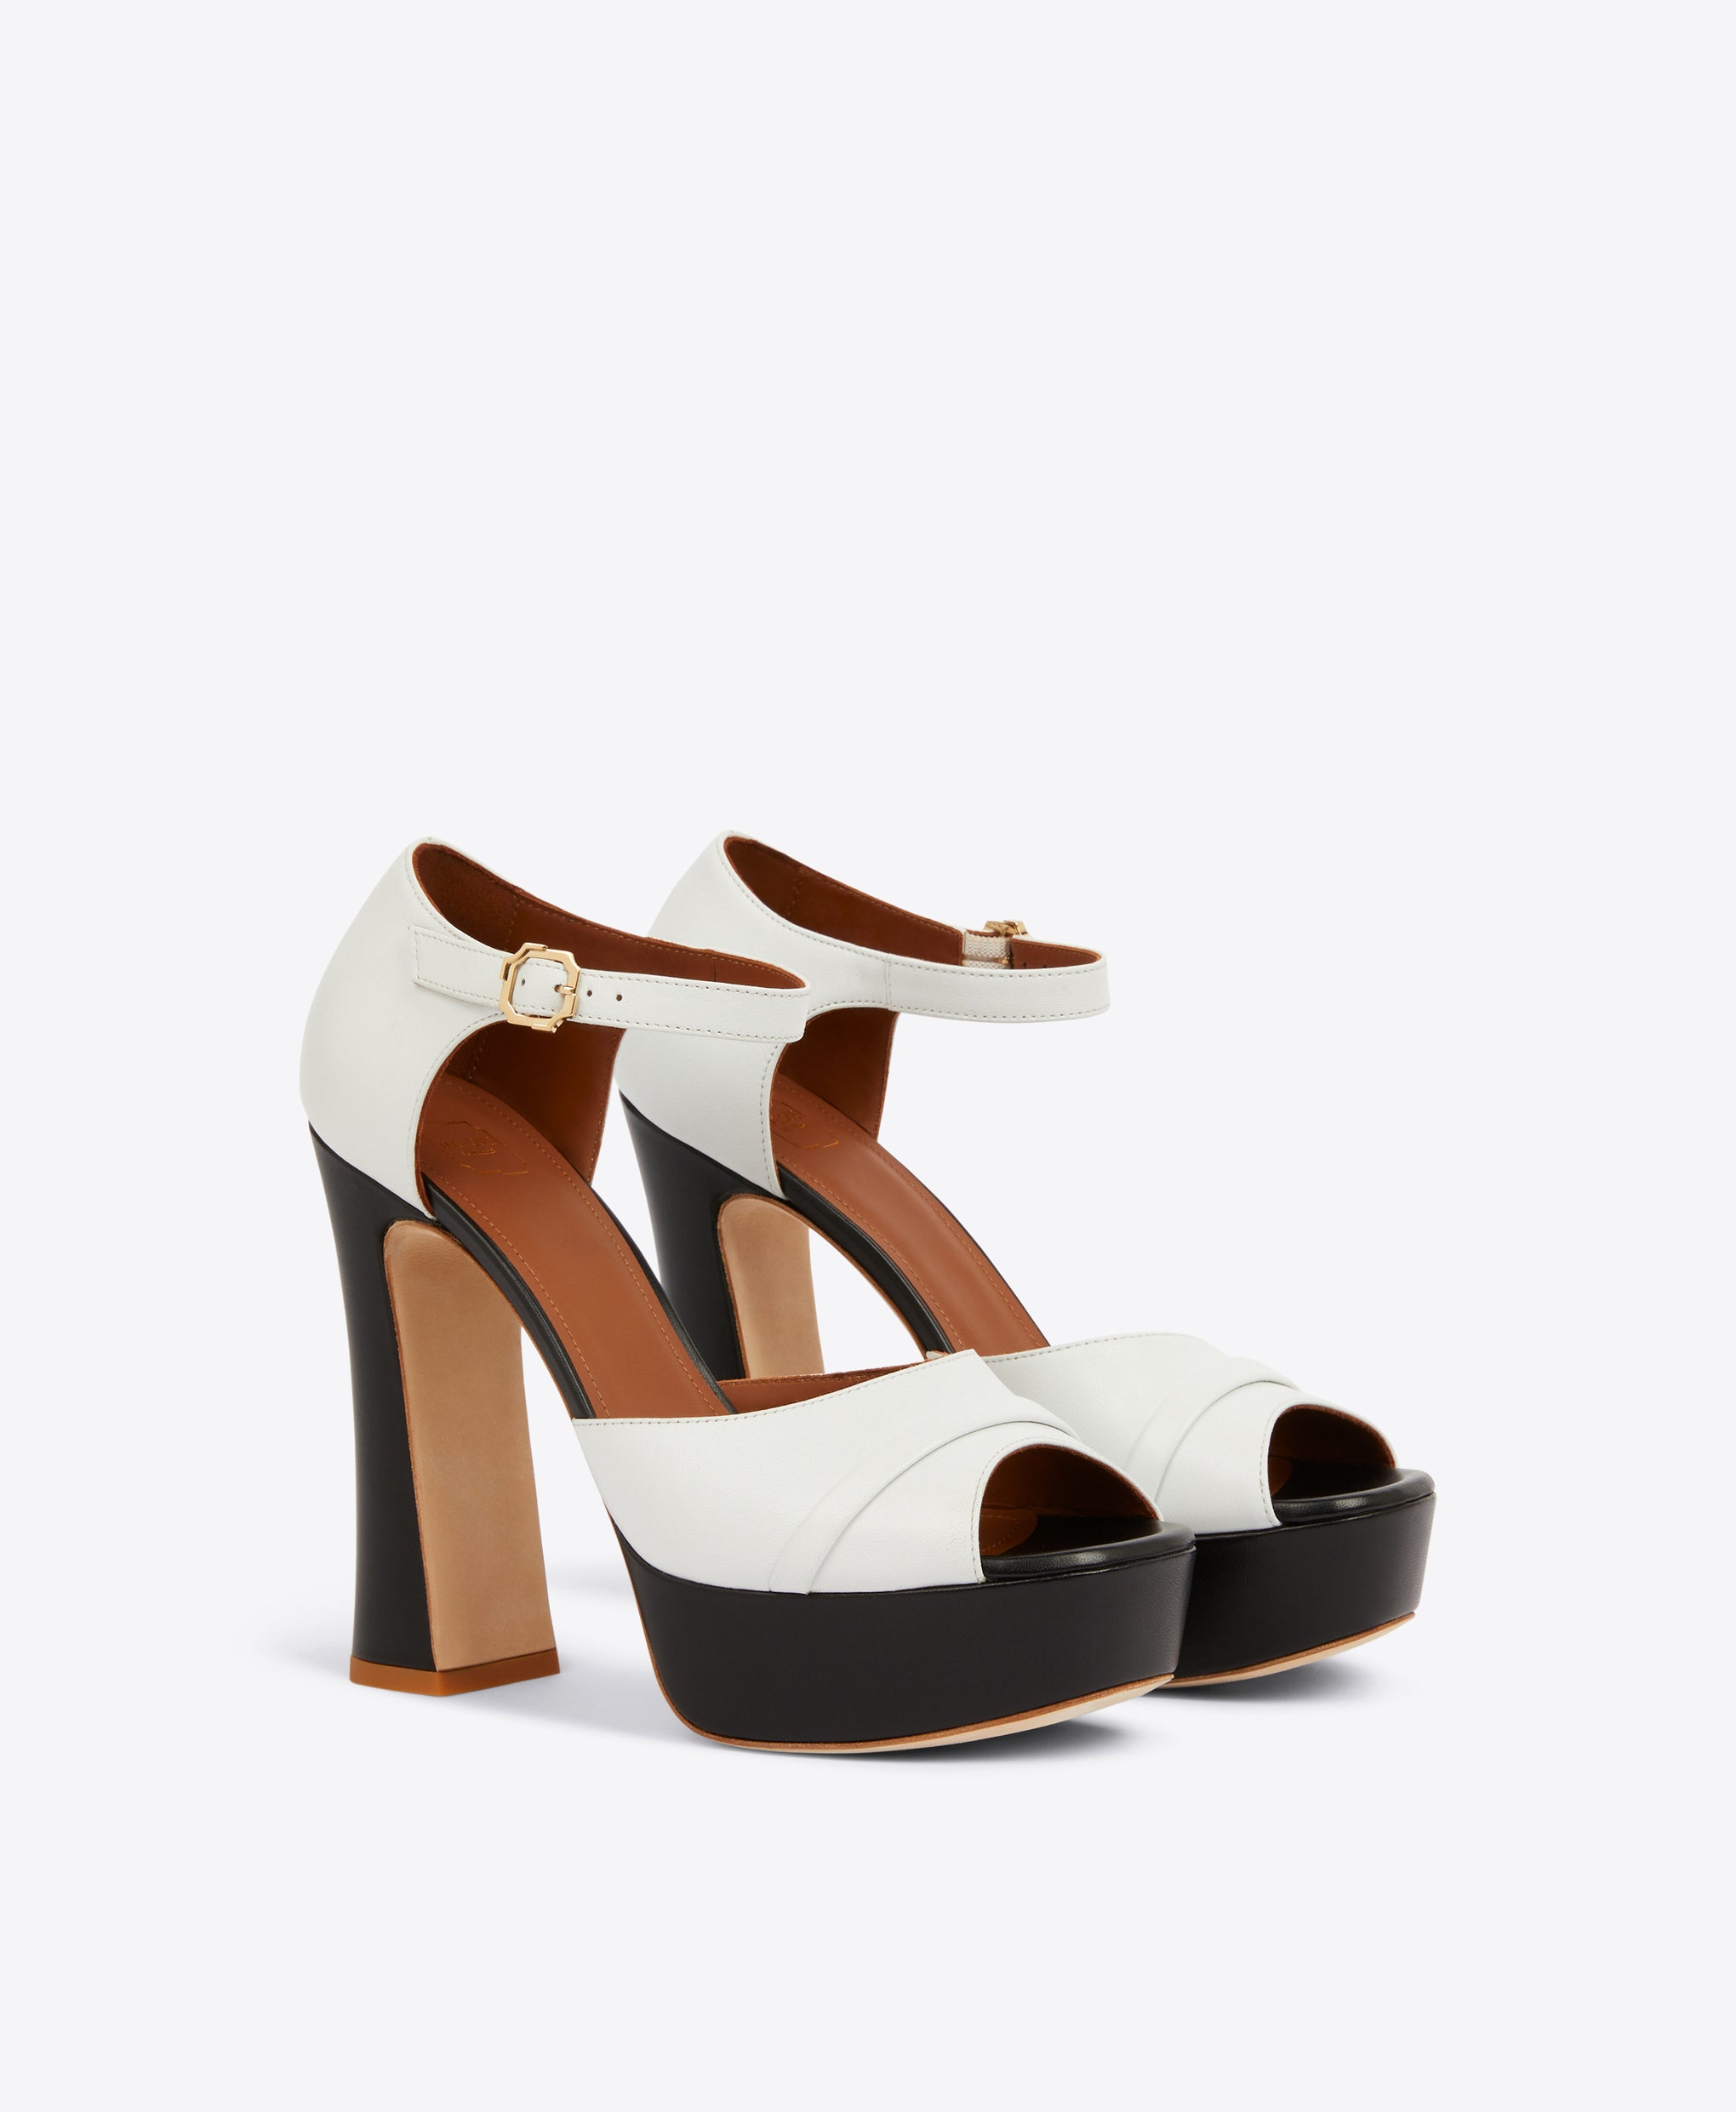 Women's Black and White Leather Platform Sandals Malone Souliers